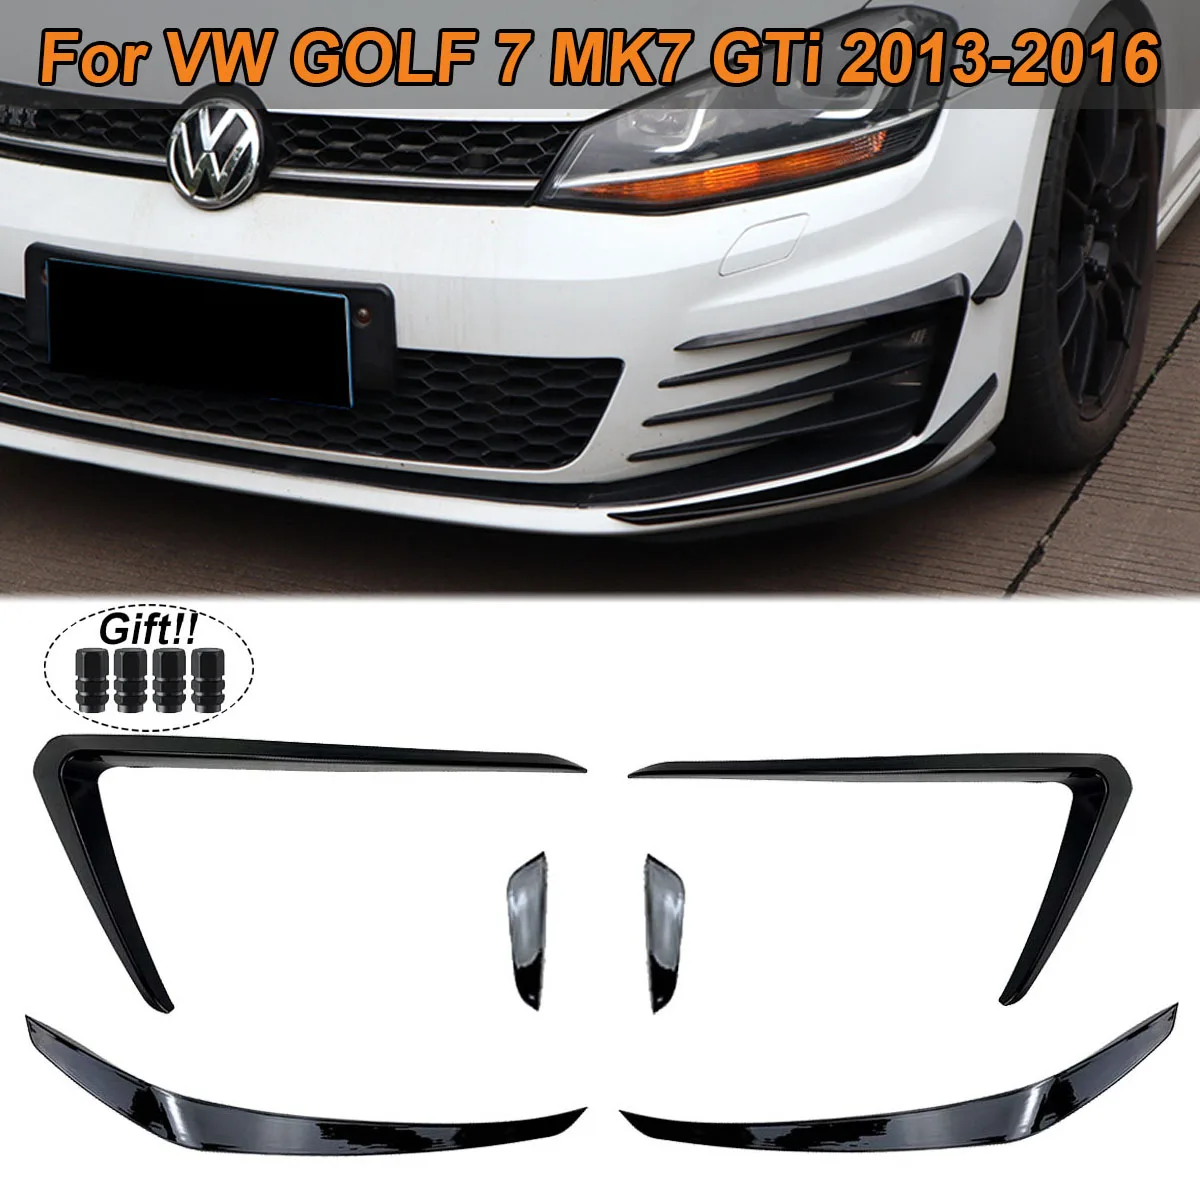 

Front Bumper Splitter Fog Light Cover Air Vent Canards Trim Body Kit Flap For VW GOLF 7 MK7 GTi ONLY 2013-2016 Car Accessories